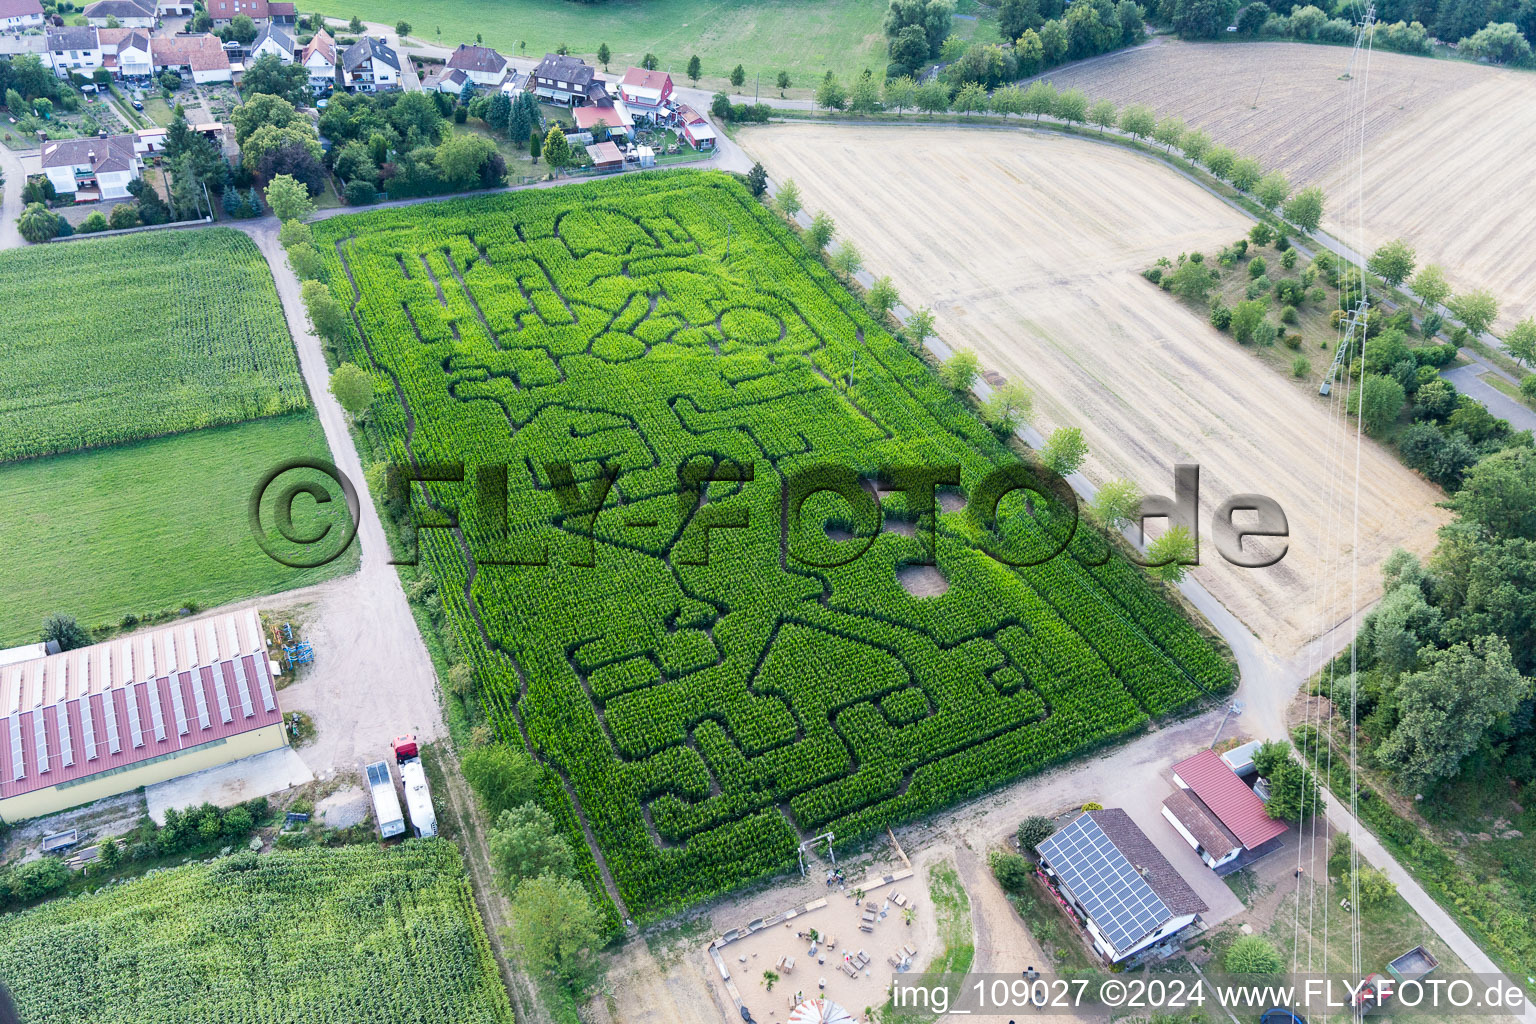 Aerial view of Maze - Labyrinth on a corn-field in Steinweiler in the state Rhineland-Palatinate, Germany